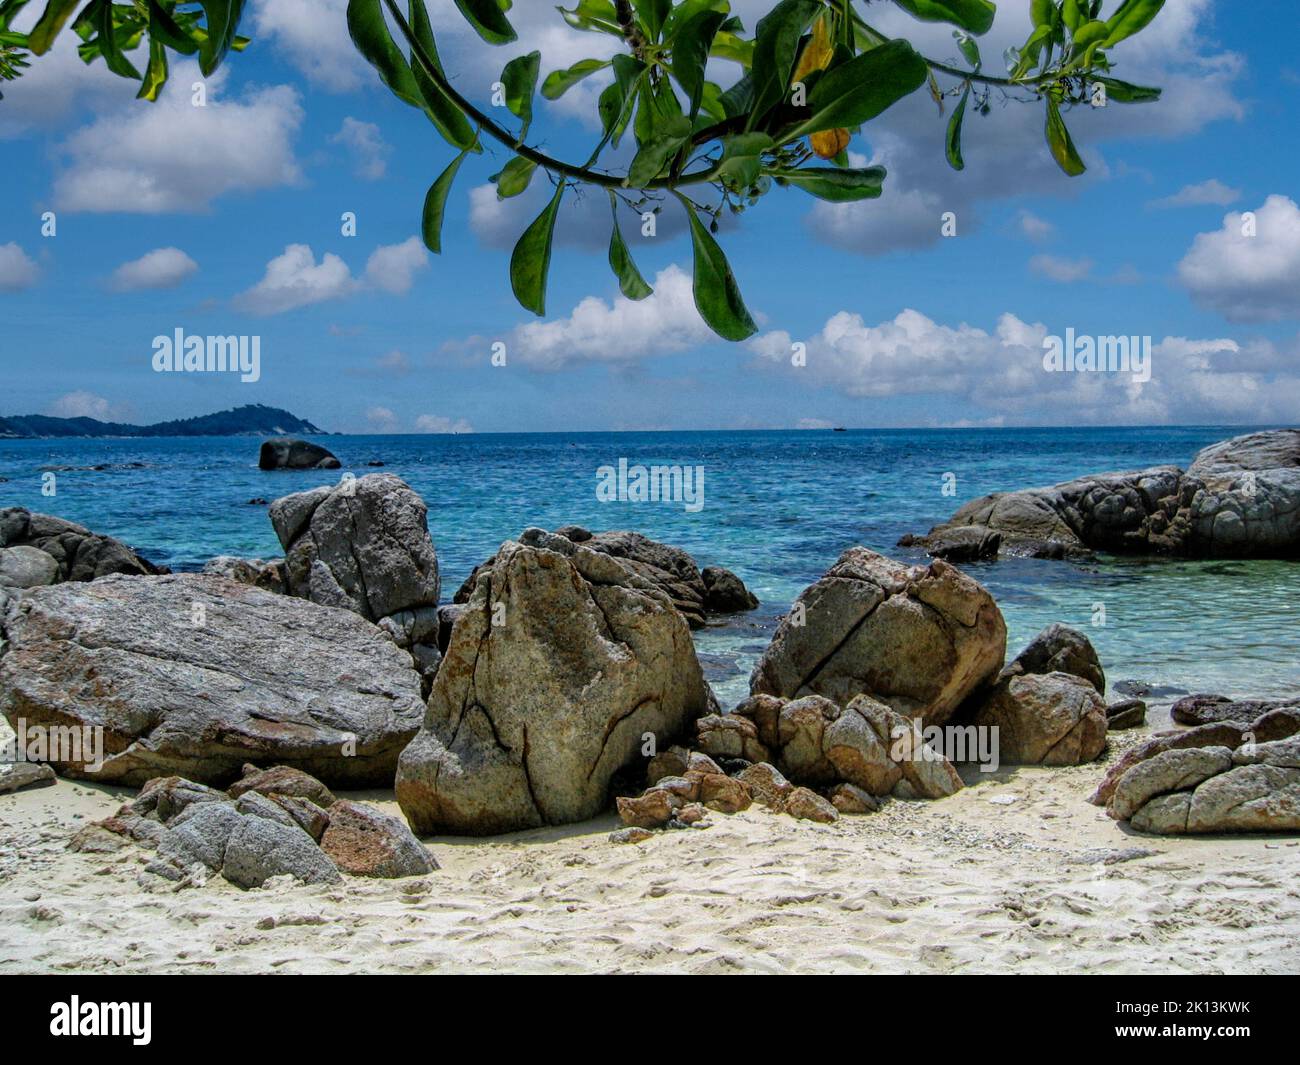 View on the ocean at Perhentian Island, Malaysia Stock Photo